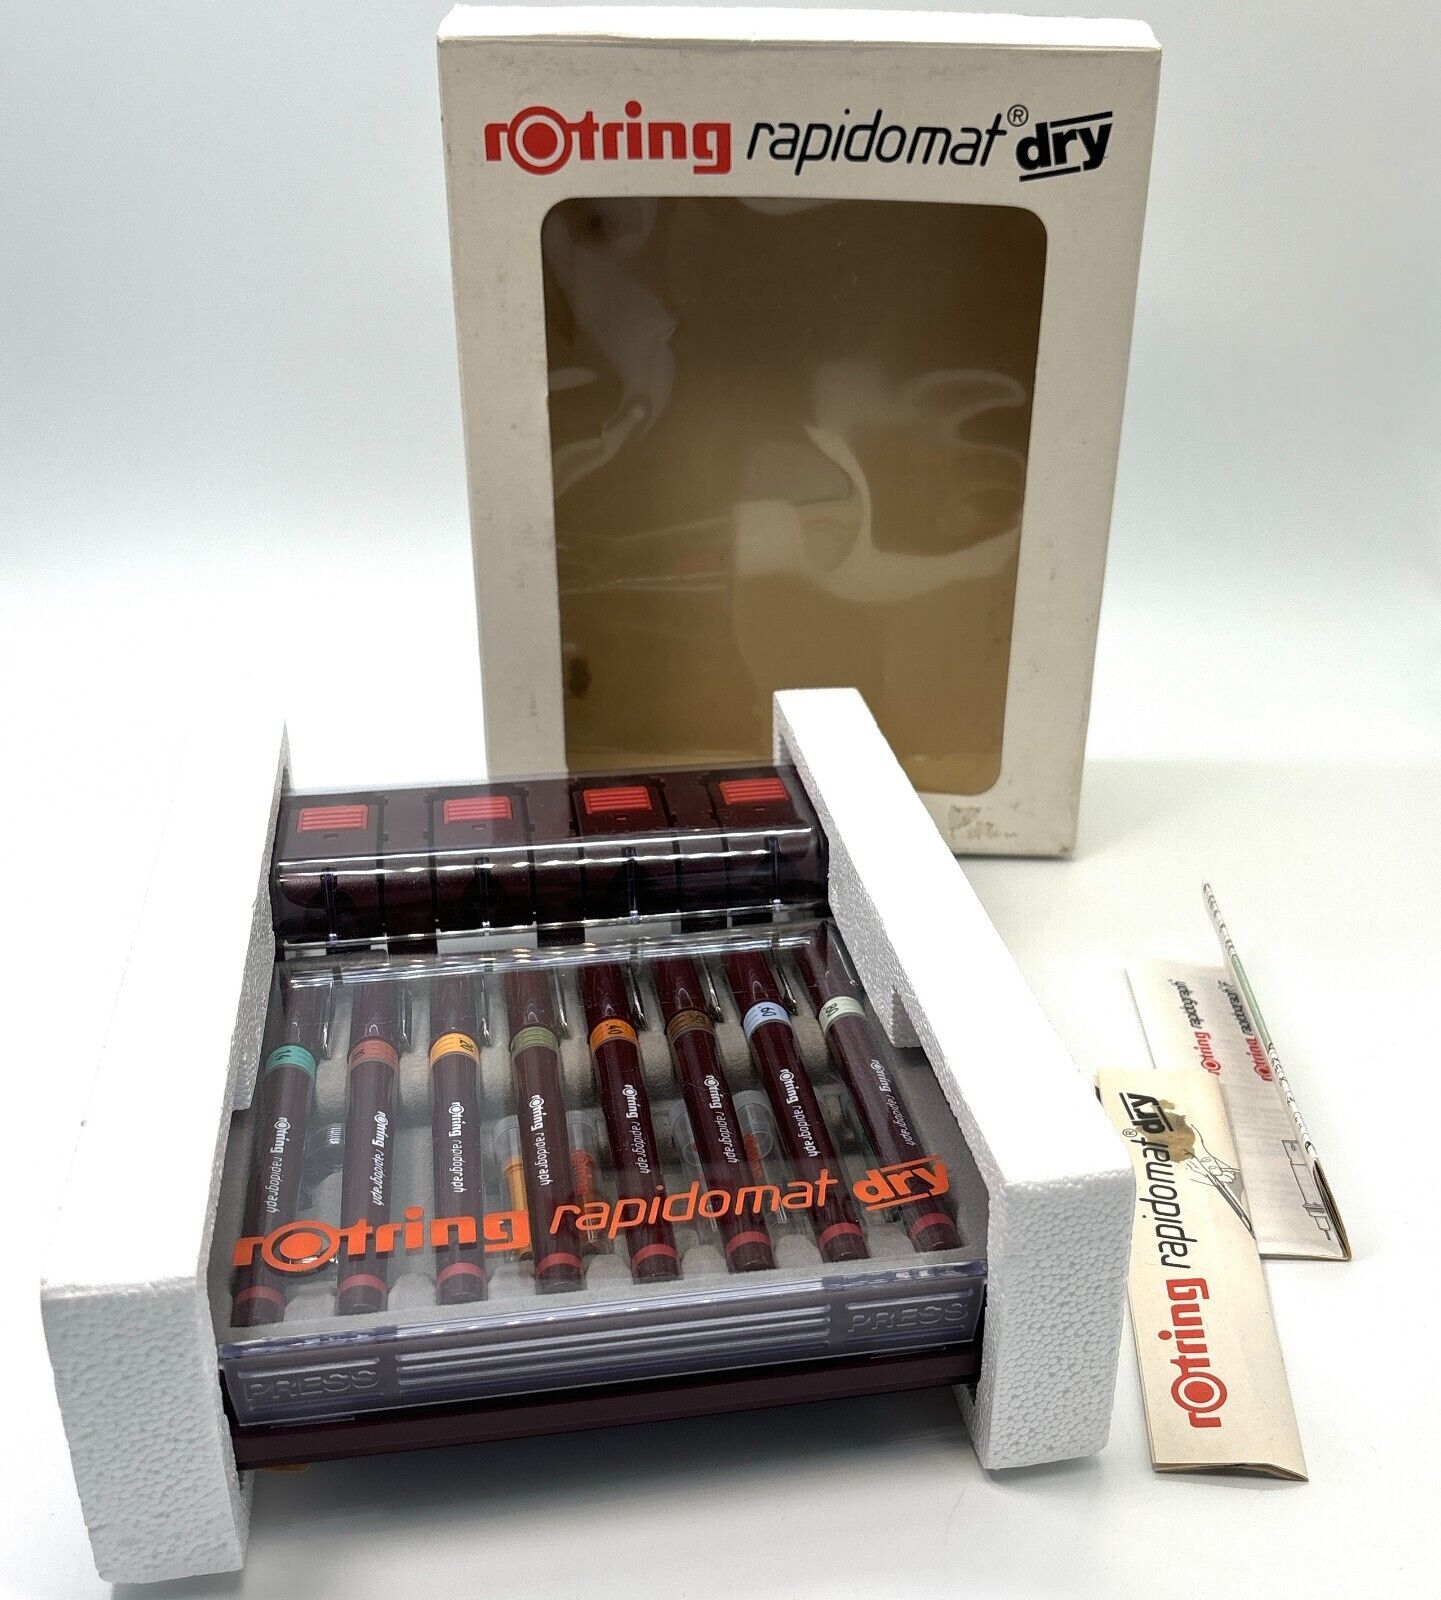 Damaged rotring rapidomat dry Set of 8 with manuals in various languages Used